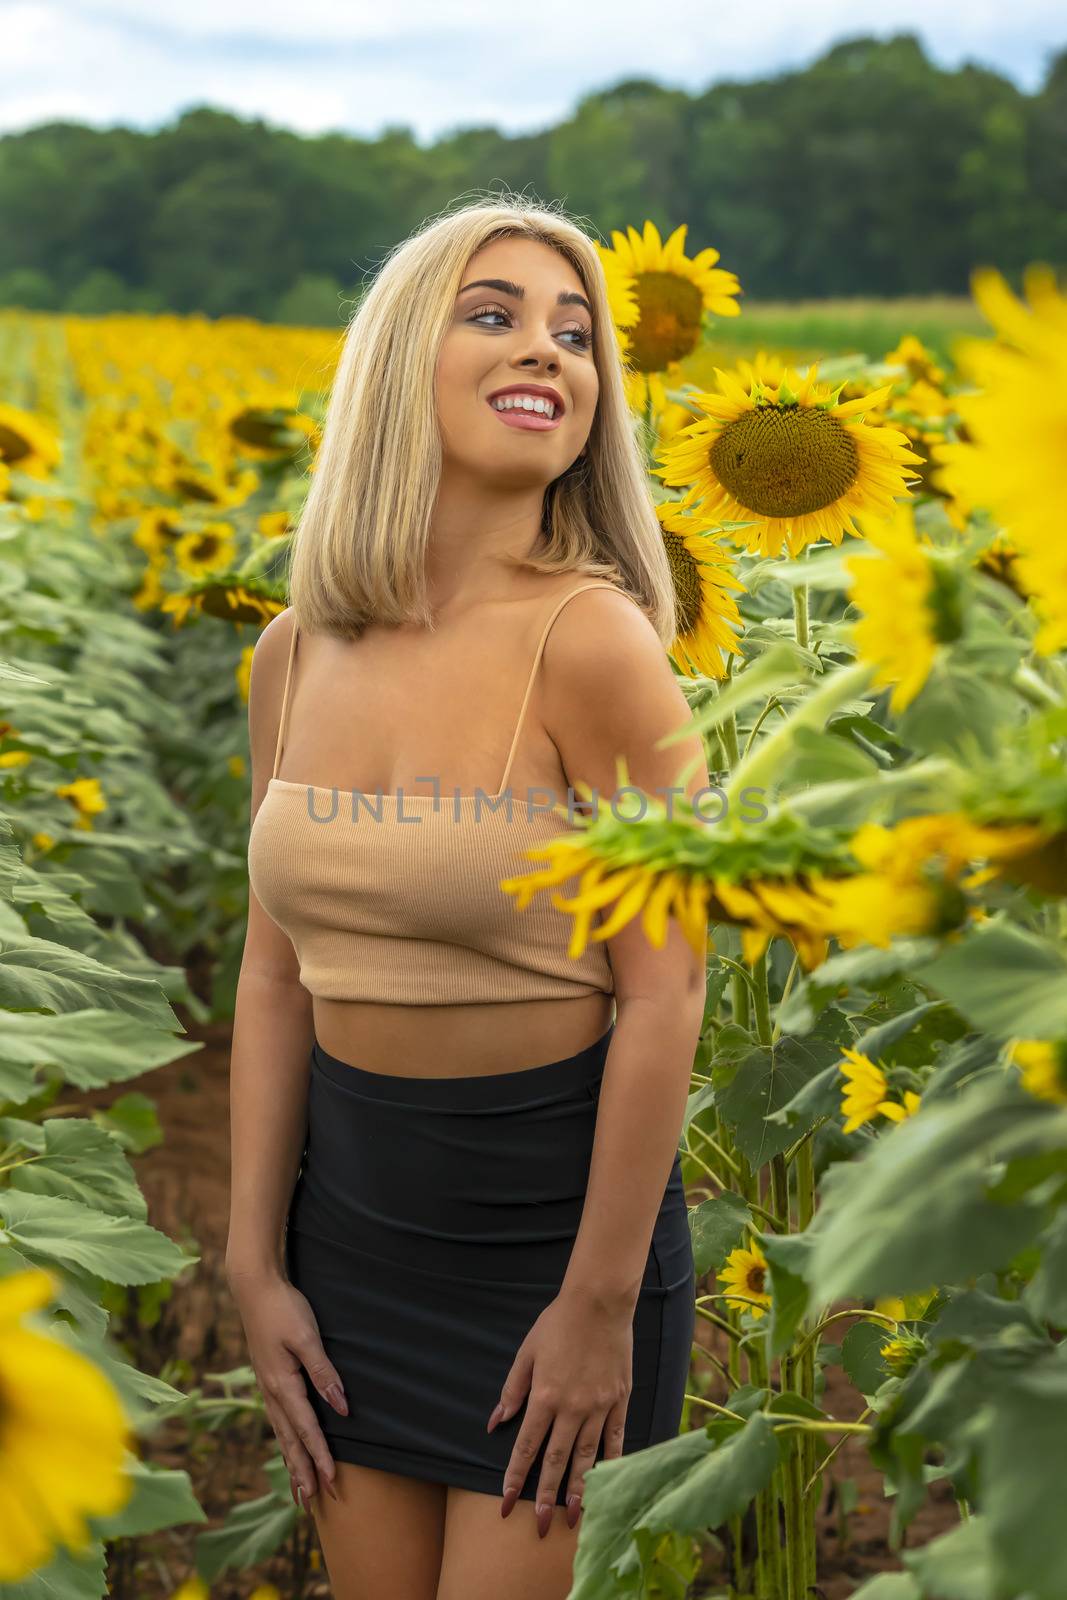 A Young Lovely Blonde Model Poses In A Gorgeous Sunflower Field While Enjoying A Summers Day by actionsports